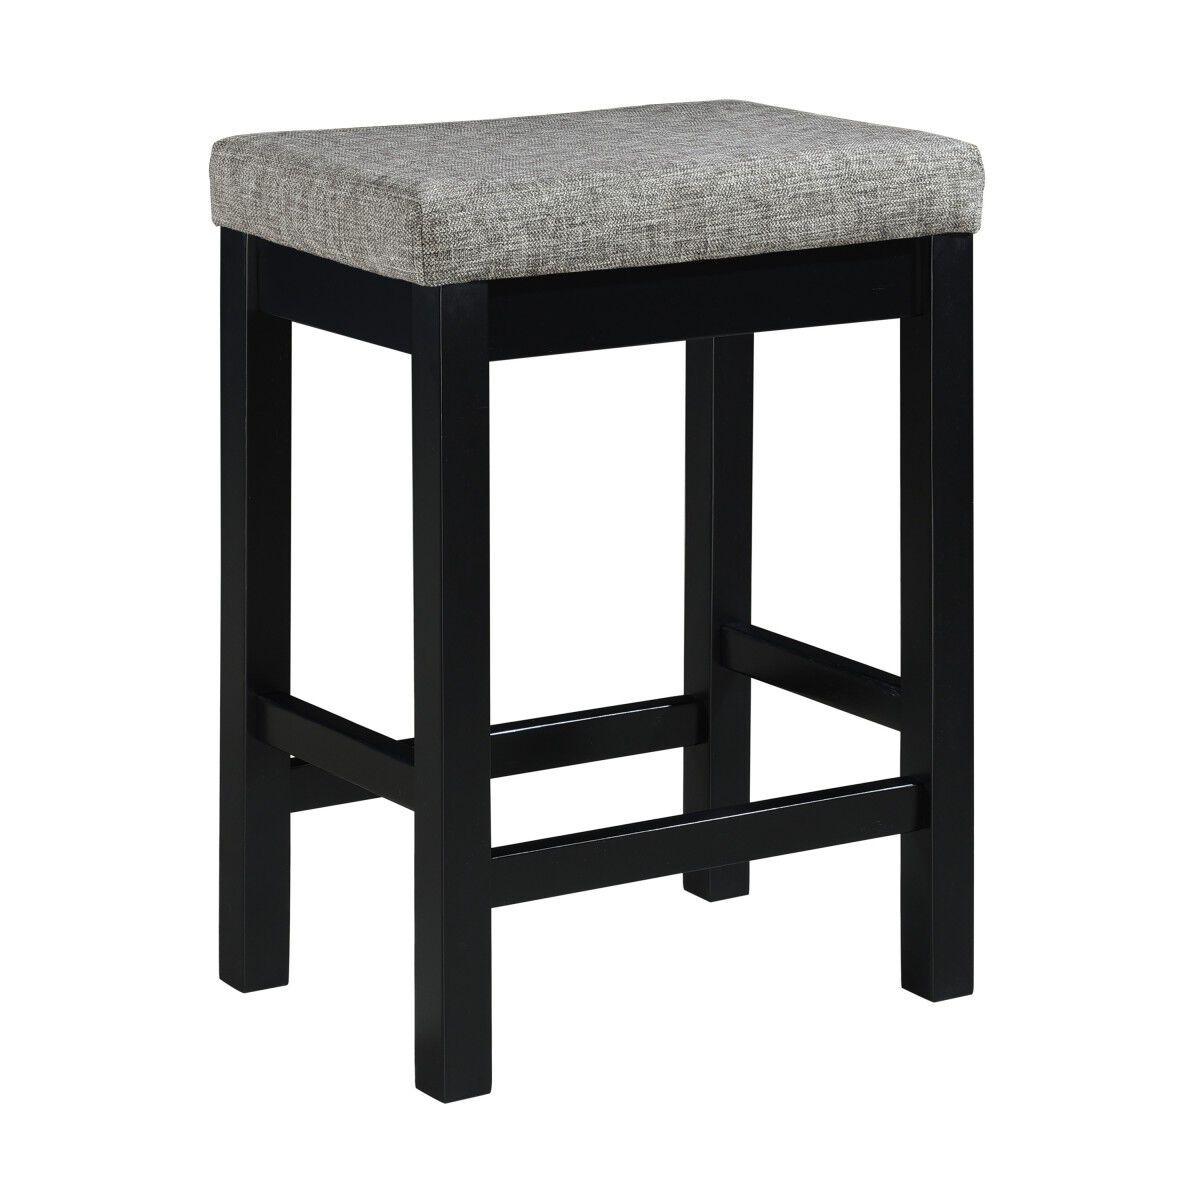 1 Drawer Counter Height Table with Backless Stools,Set of 4, Black and Gray